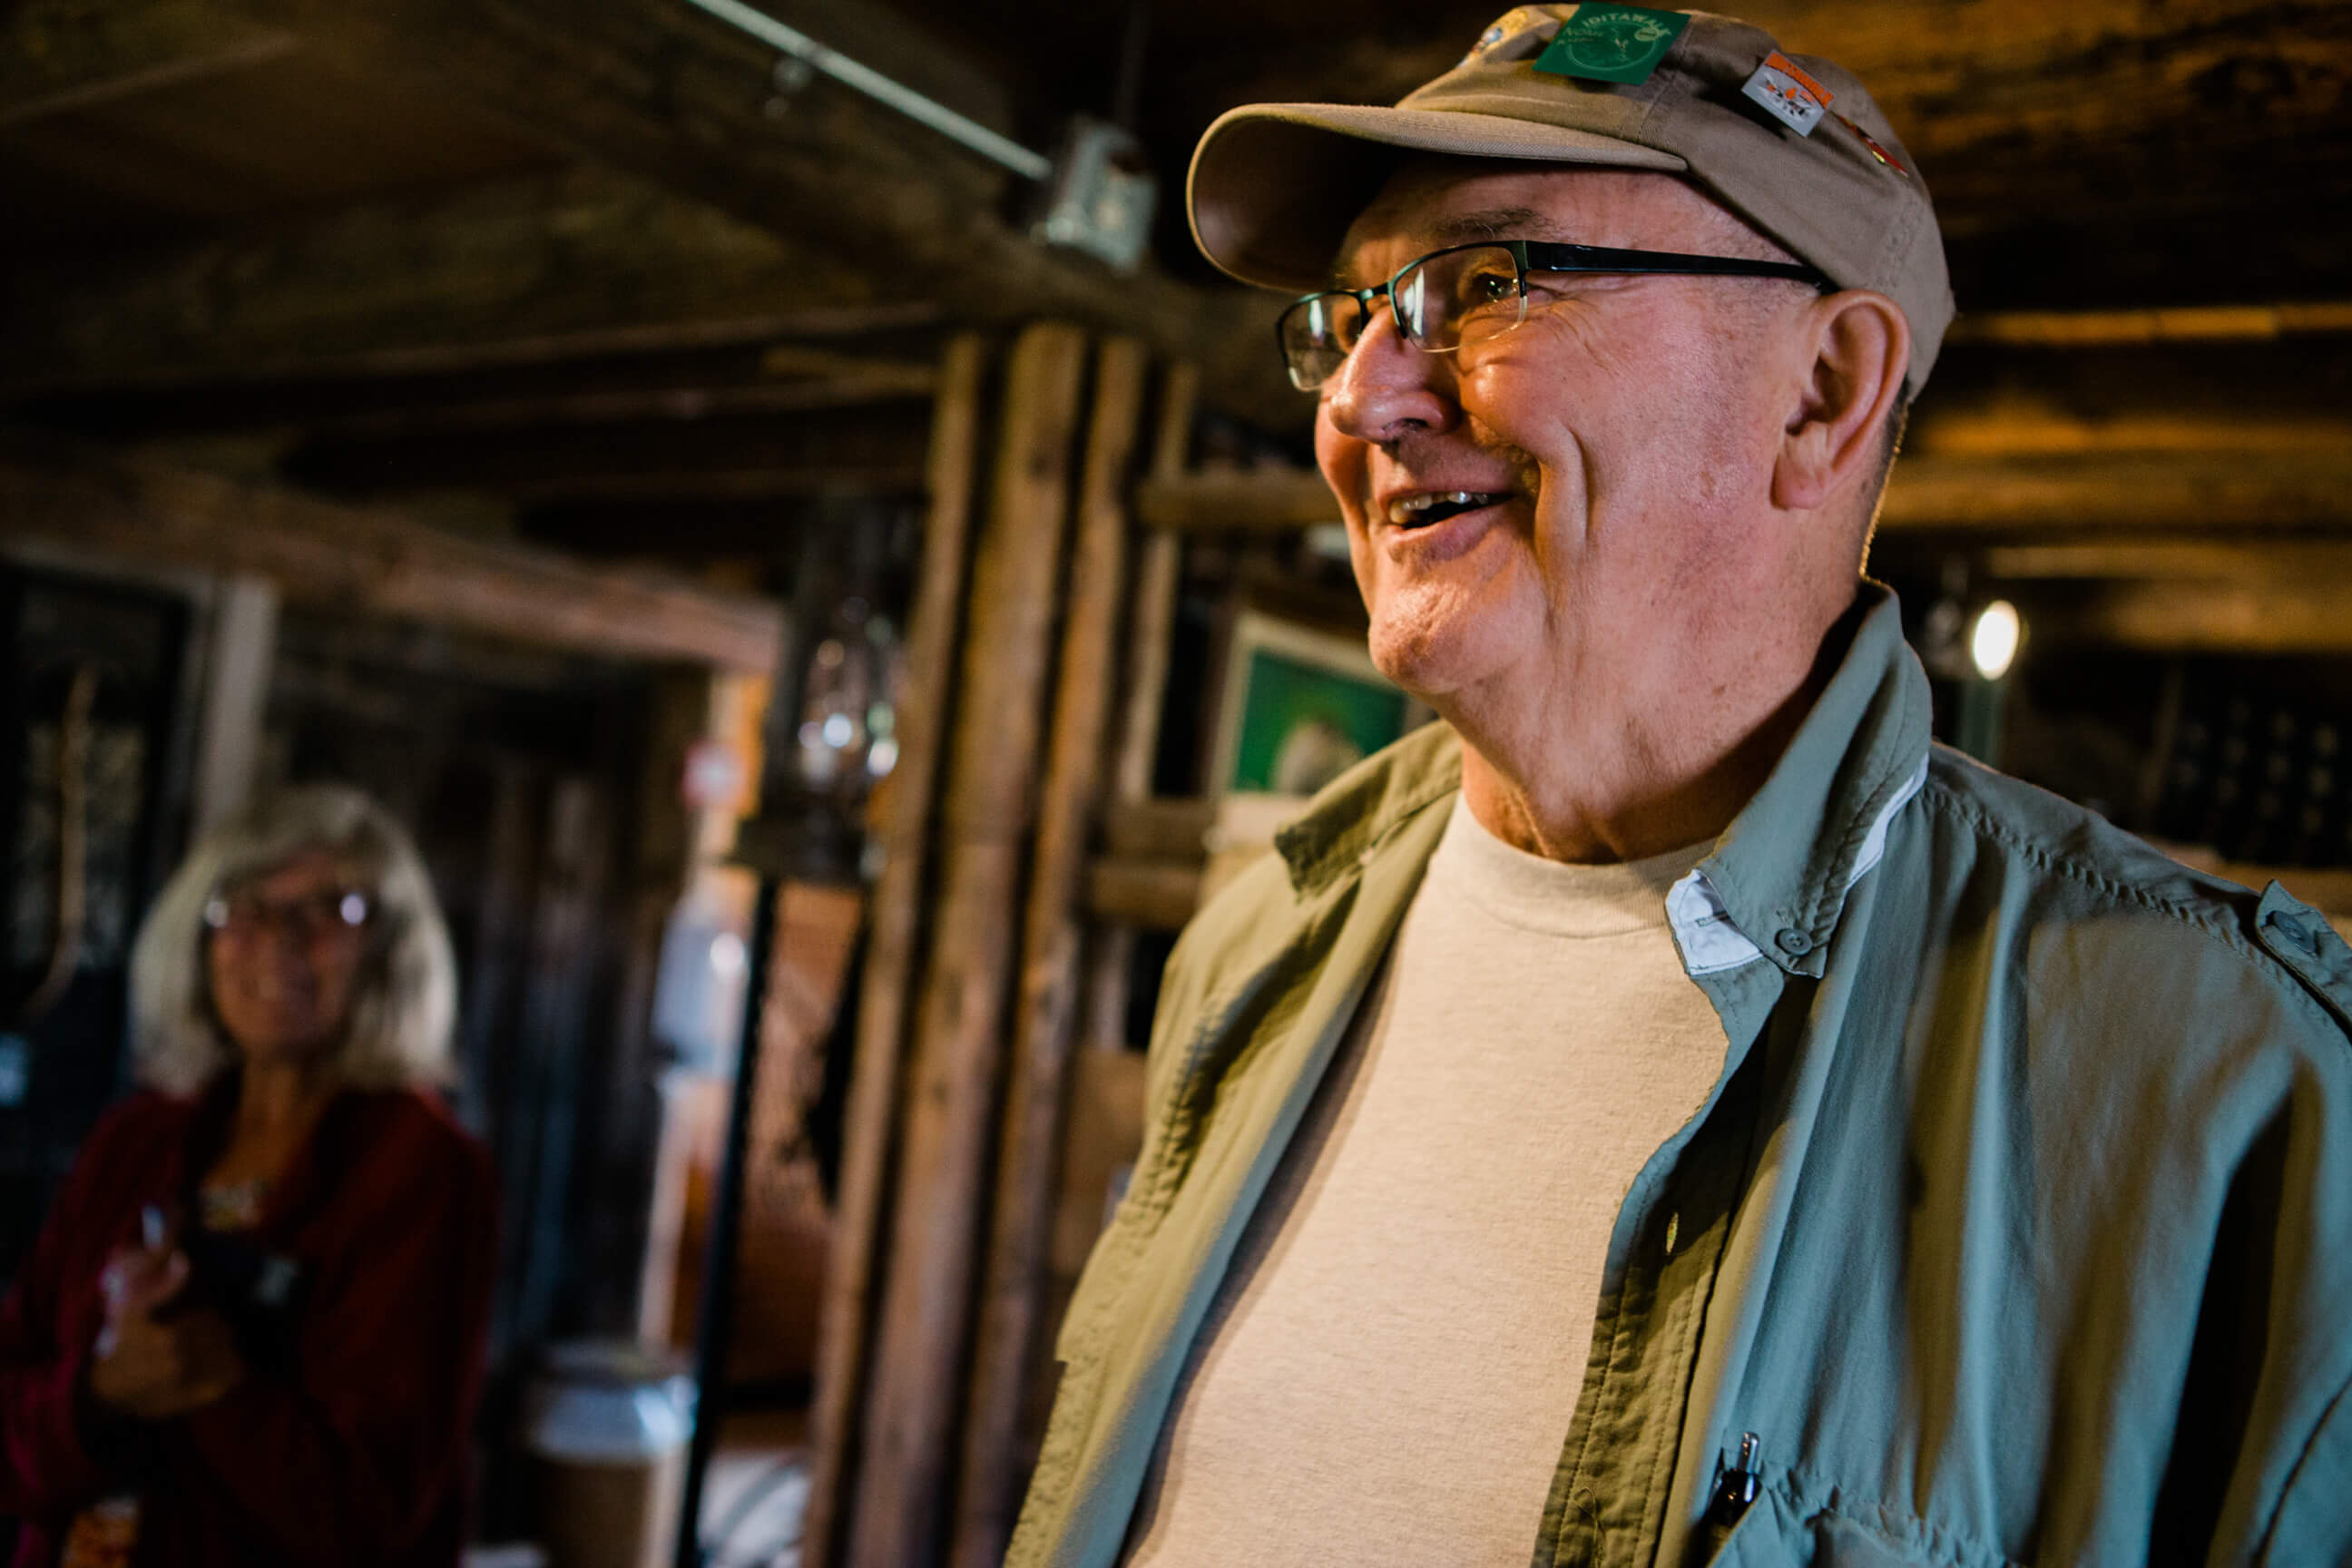 A man laughs and smiles at Seeley Lake Historical Society in Seeley Lake Montana